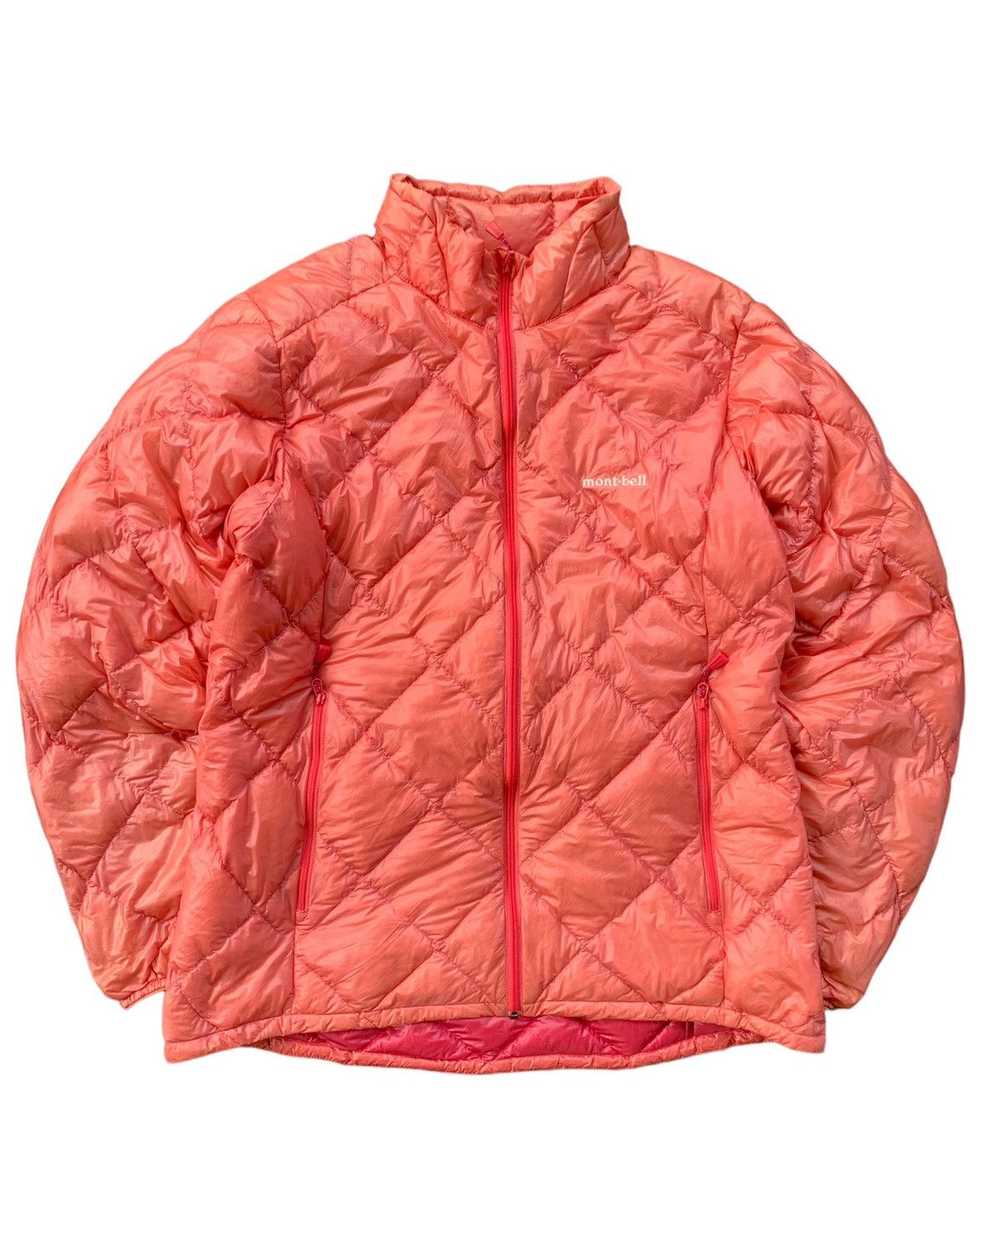 Montbell 2000s Diamond Lightweight Down Jacket - image 1